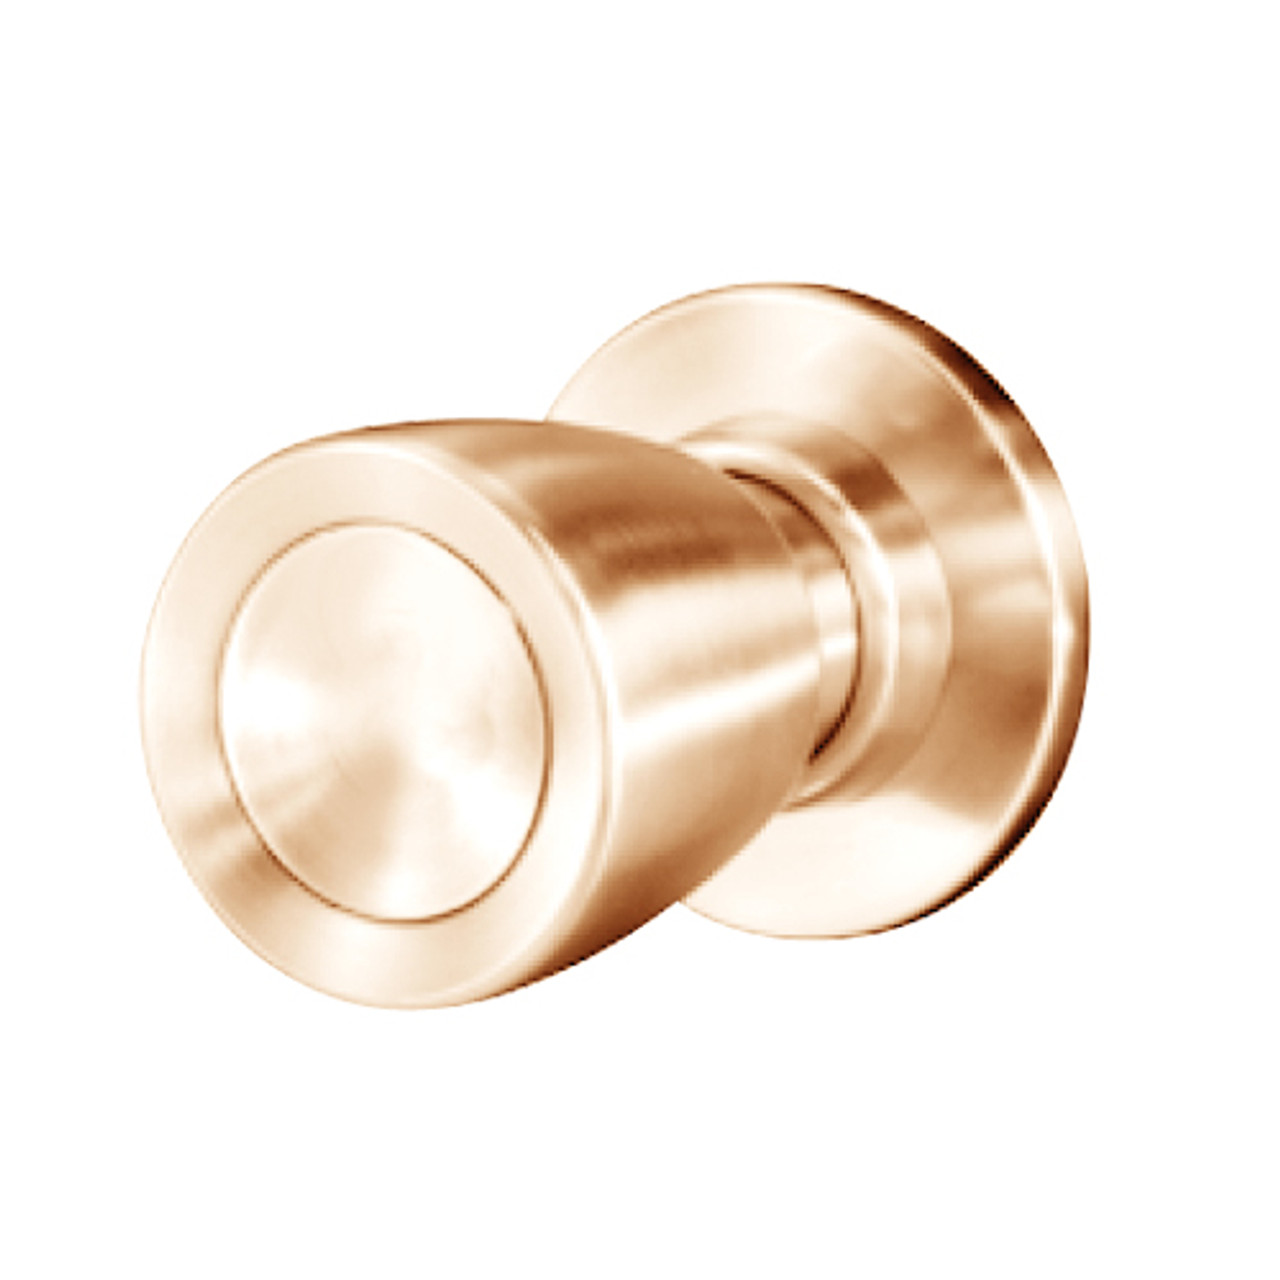 8K30Q6CS3611 Best 8K Series Exit Heavy Duty Cylindrical Knob Locks with Tulip Style in Bright Bronze